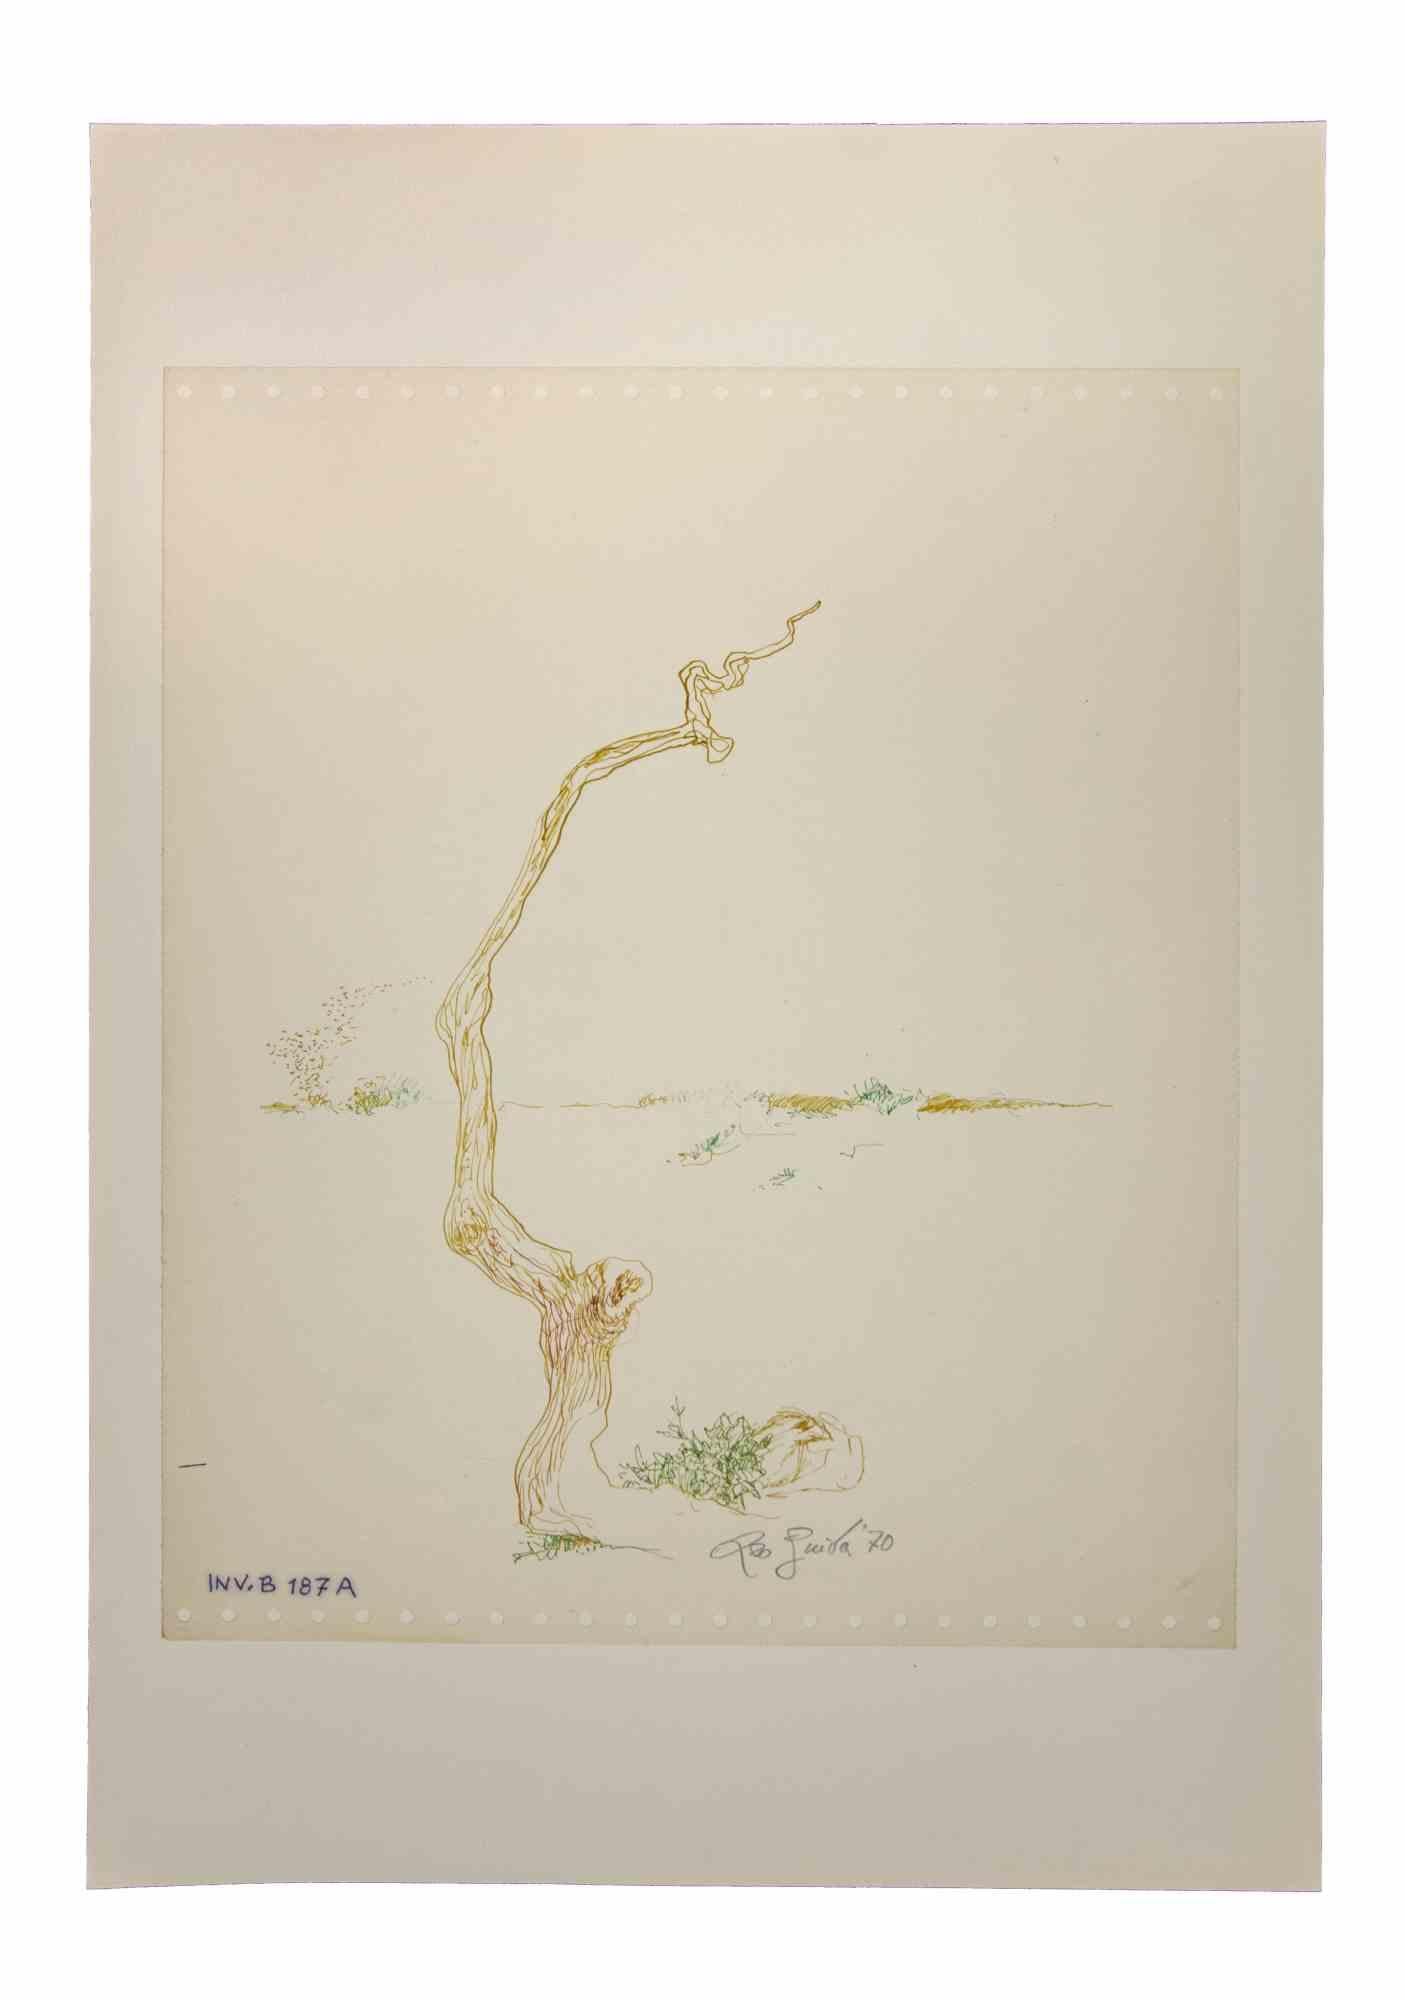 Eagle is an original Contemporary artwork realized  in 1970 by the italian Contemporary artist  Leo Guida  (1992 - 2017).

Original drawing in china ink on ivory-colored paper, glued on cardboard (50 x 35 cm)
 
Hand-signed and dated on the lower